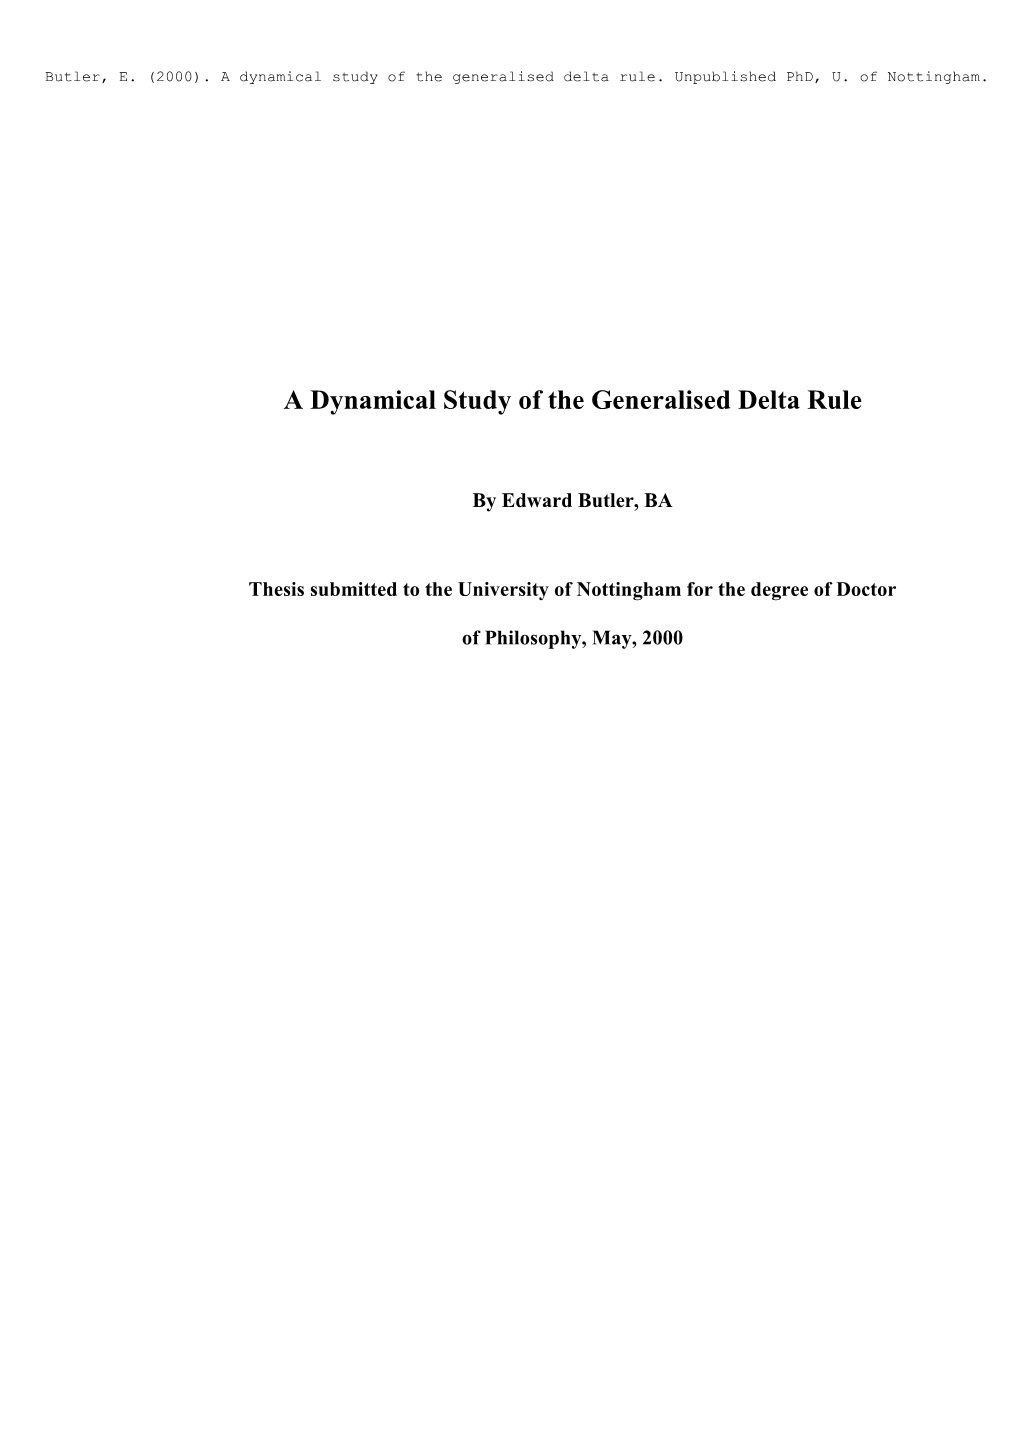 A Dynamical Study of the Generalised Delta Rule